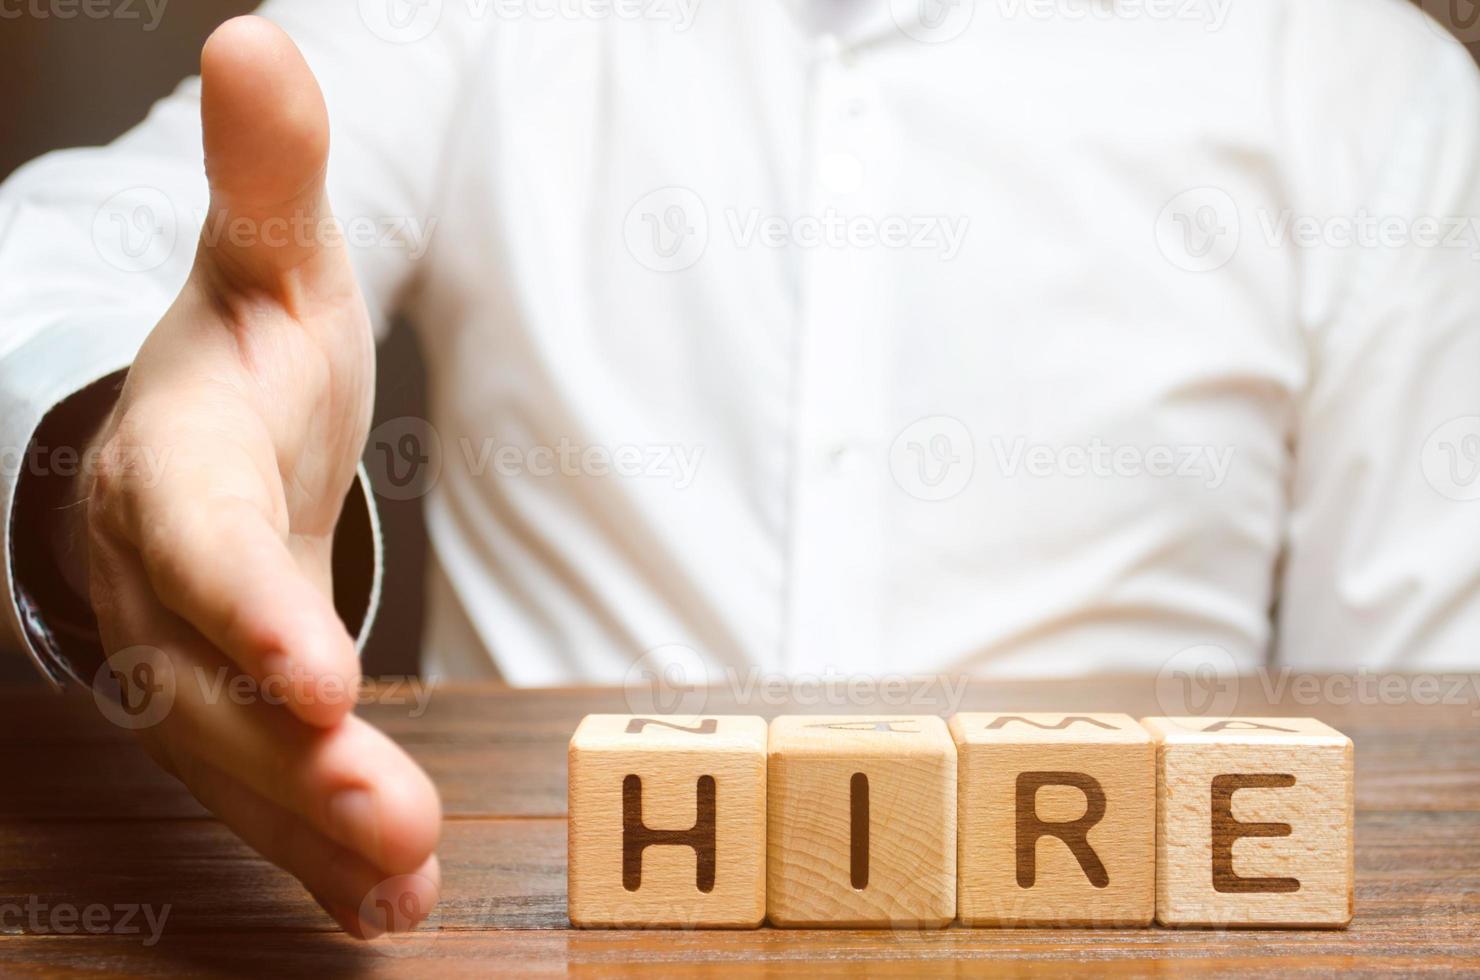 A businessman holds out his hand to shake hands and agree to hire on the background of the word hire. Recruitment concept. Search for employees and professionals on favorable terms. photo